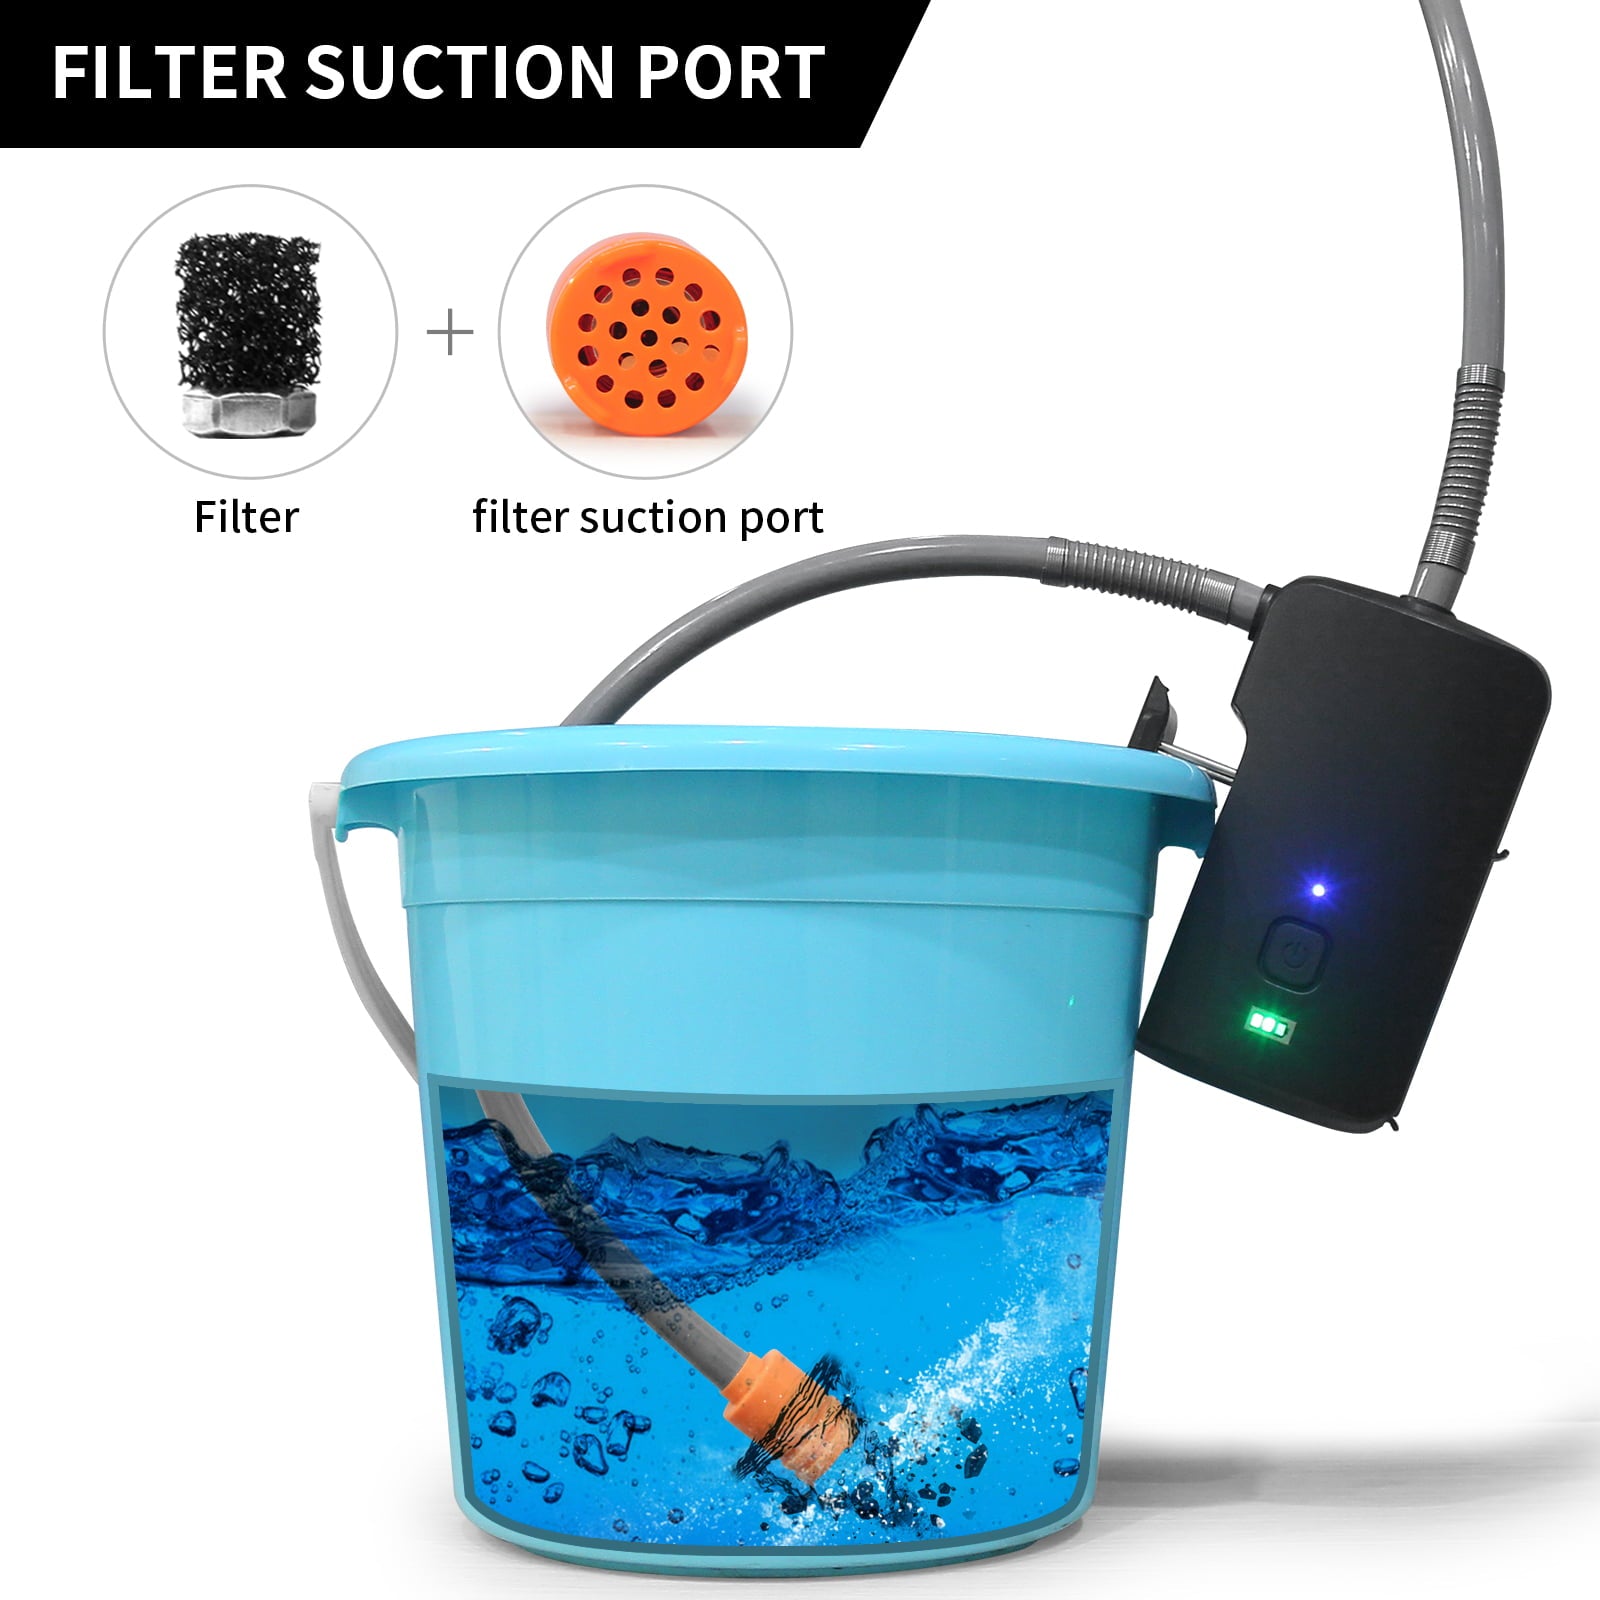 Portable Outdoor Shower, 2 Flow Modes, Removable Rechargeable Battery 4400 mAh with LED Light, Battery Powered Shower Pump for Hiking/Backpacking, Camping, Travel, Beach, Pets, Watering Flowers